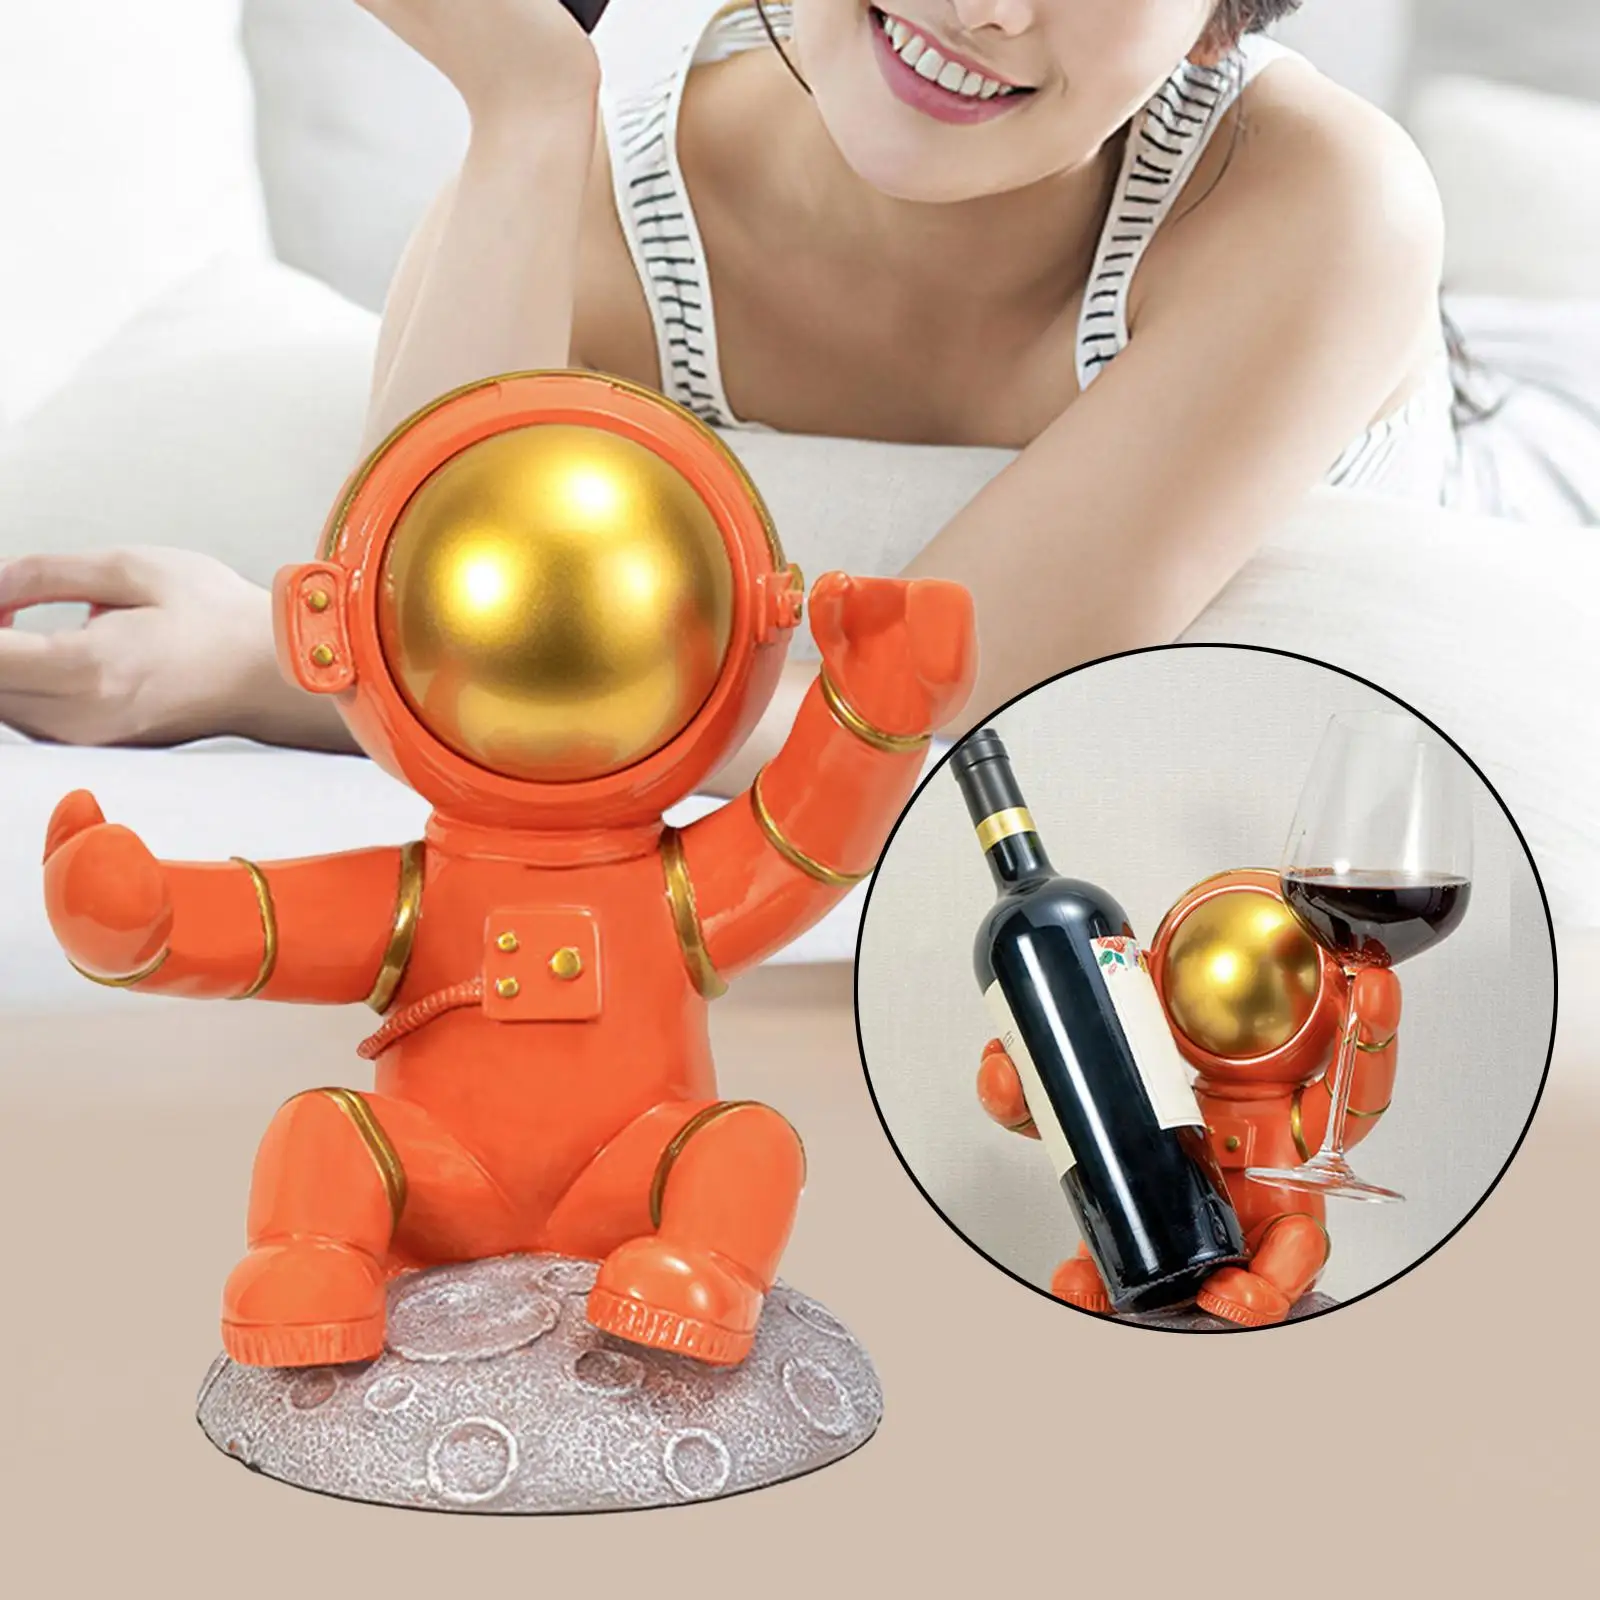 Resin Astronaut Wine Bottle Holder Figurine Wine Rack Spaceman Statue Stand for Home Countertop Bar Decoration Ornament